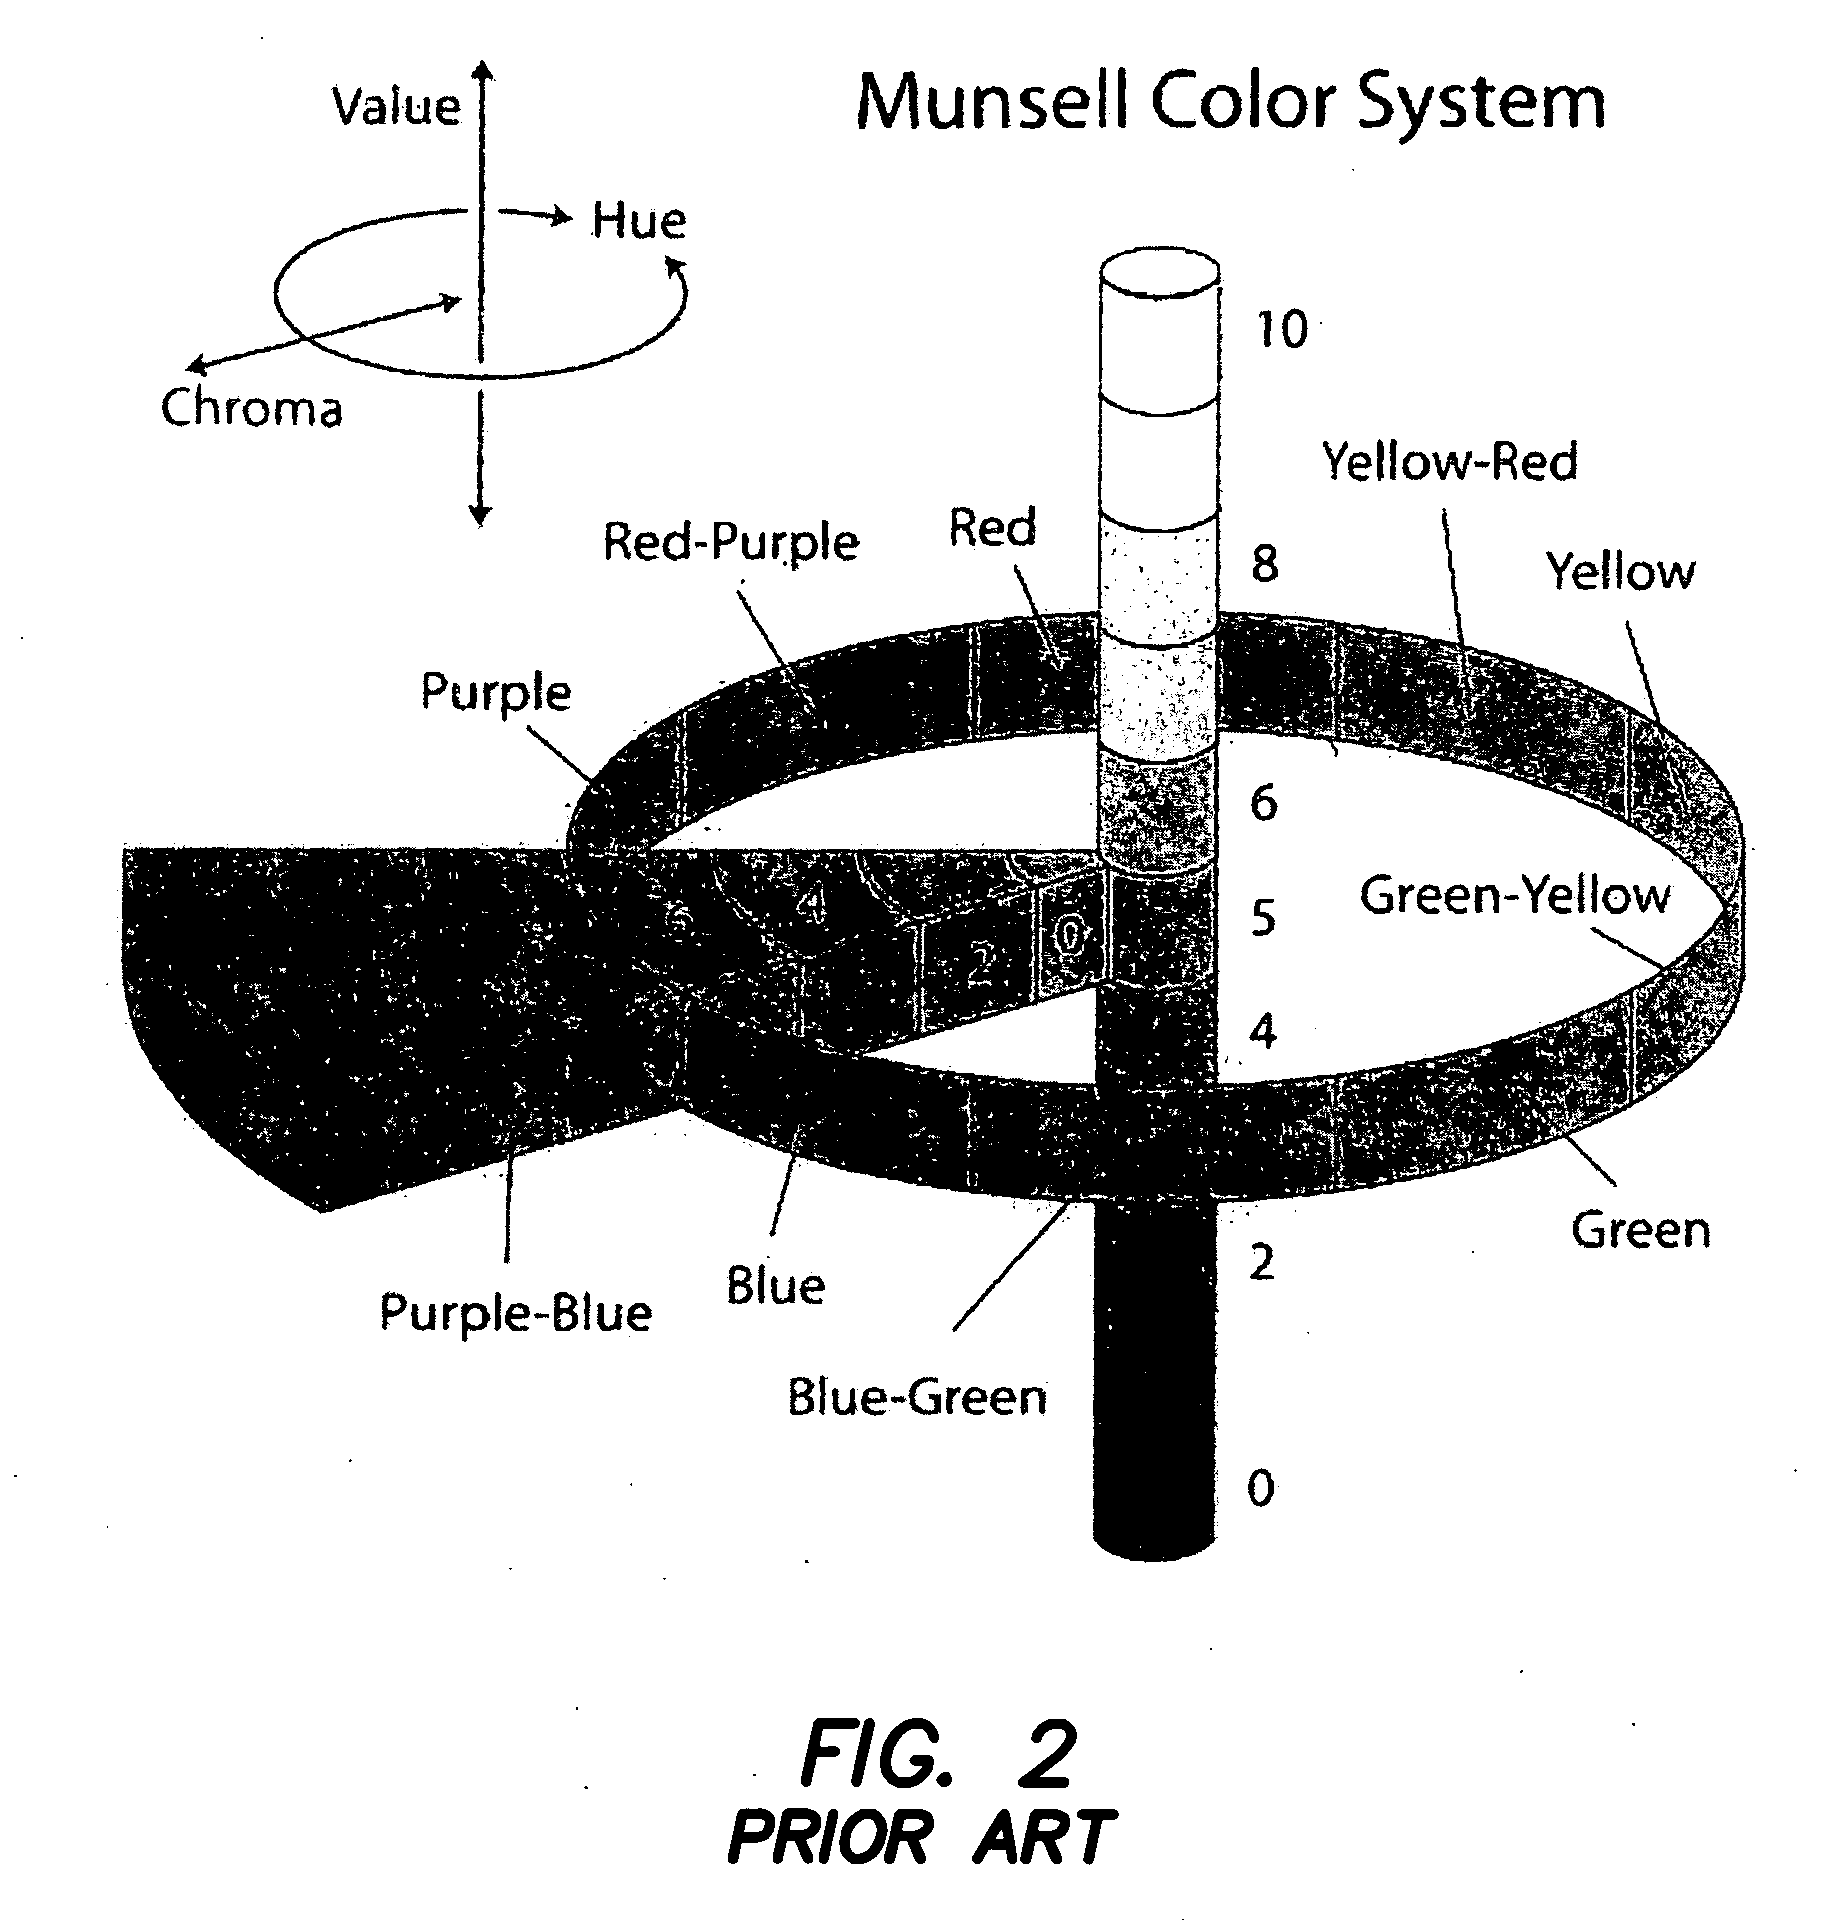 Method and apparatus for use of an universal color index (UCI): a color appearance system calibrated to reflectance spectra